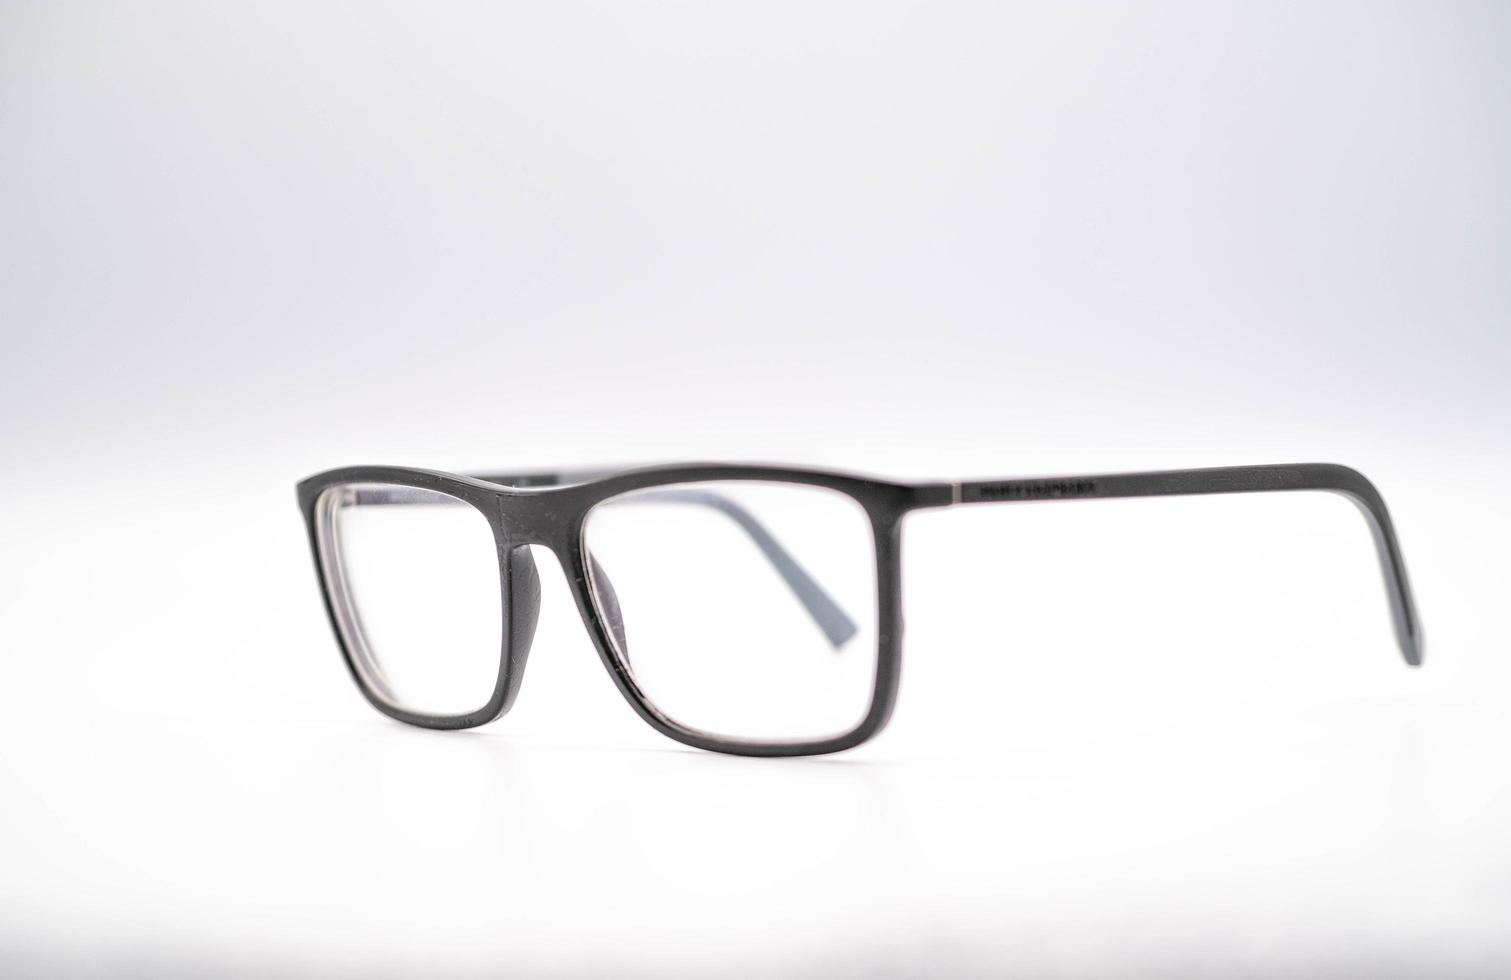 black glasses with a thick rim photographed against a white background, during a photo shoot in January 2023